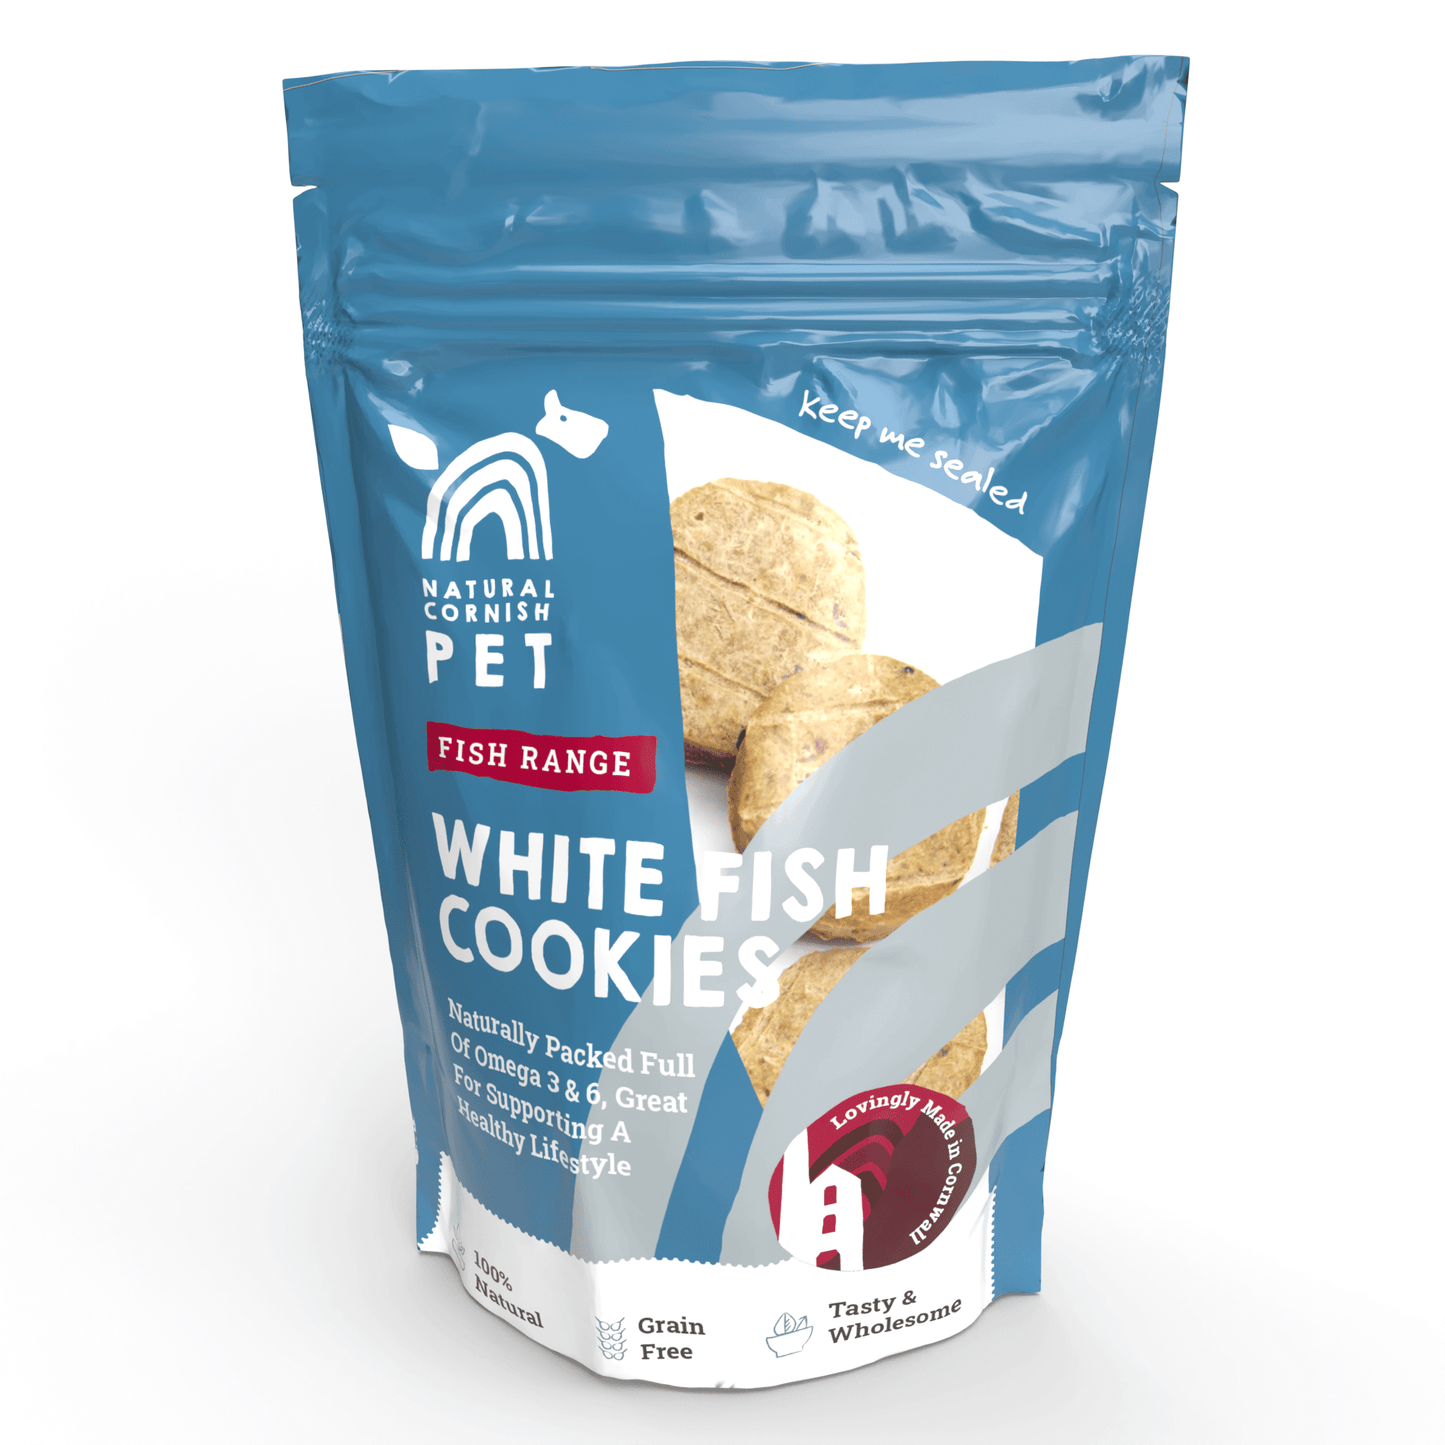 Natural Cornish Dog Treats Whitefish Cookies for Dogs